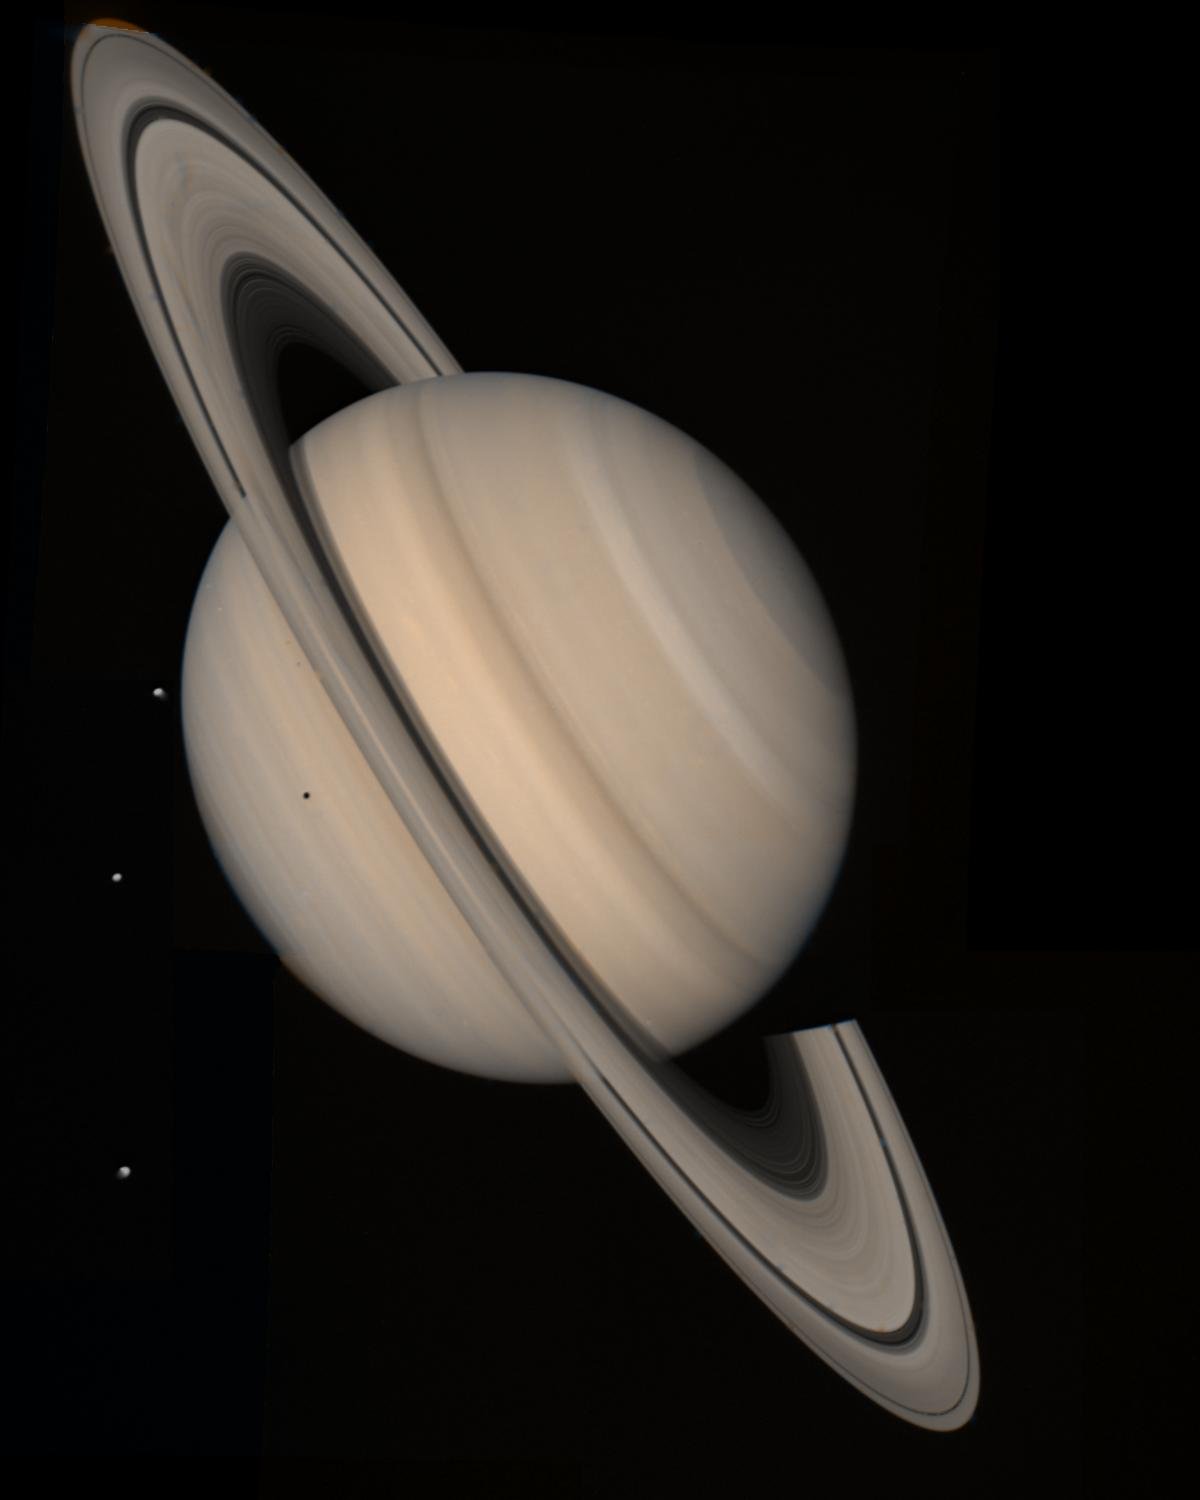 Image of Saturn taken by the Voyager 2 spacecraft